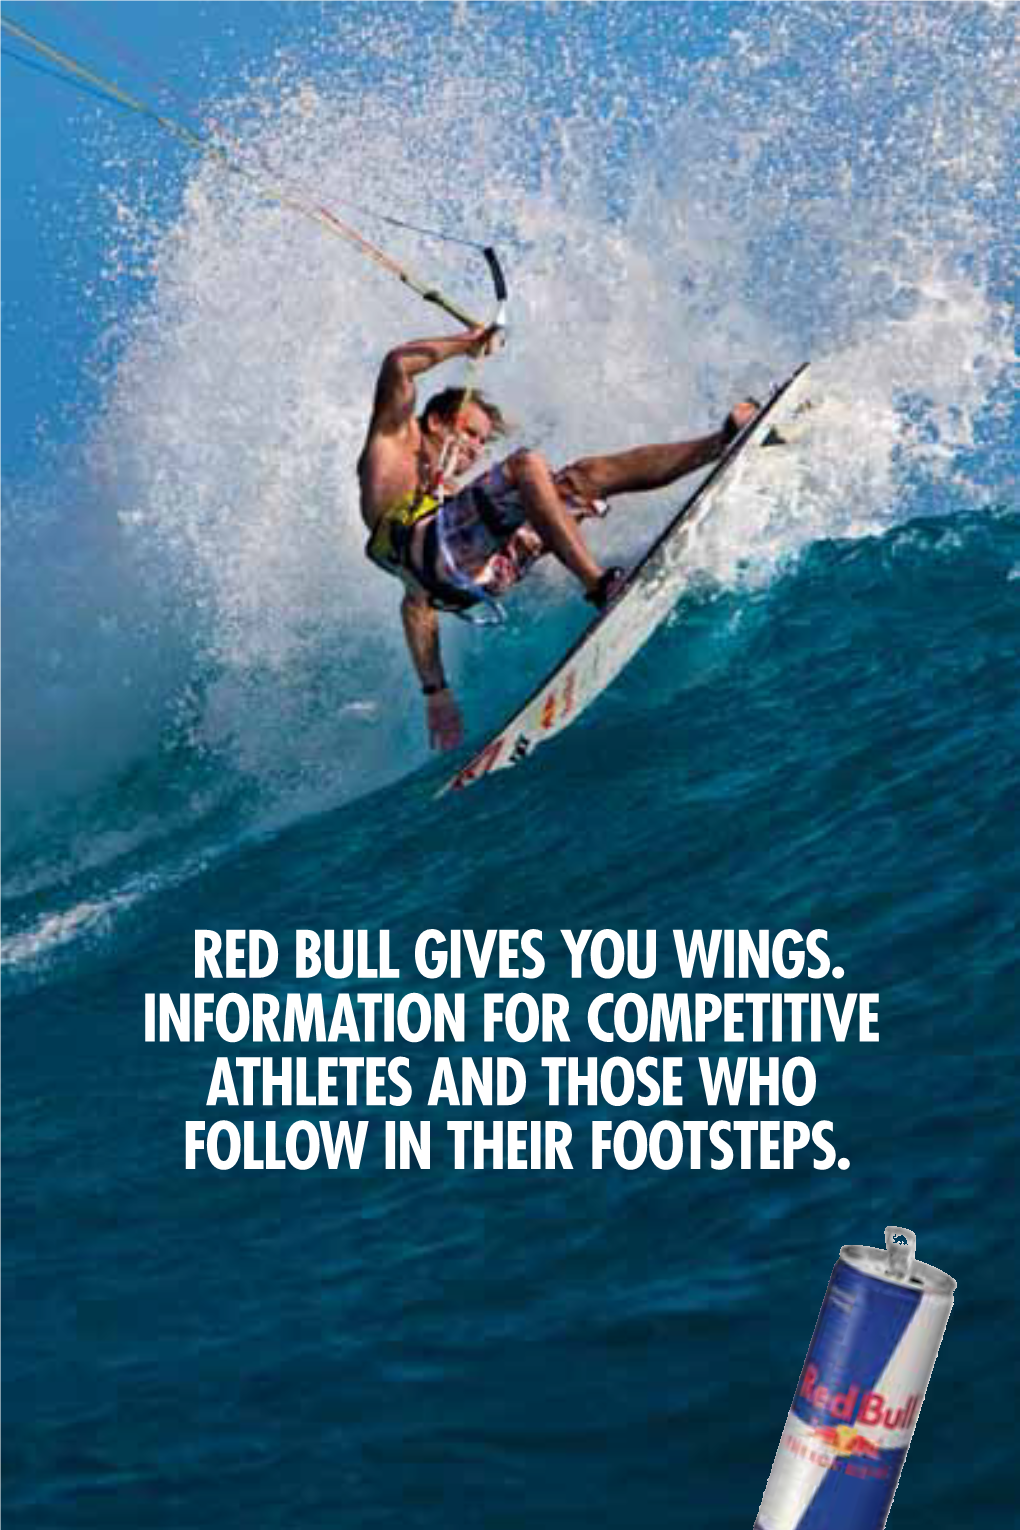 RED BULL Gives You Wings. INFORMATION for COMPETITIVE ATHLETES and THOSE WHO FOLLOW in THEIR FOOTSTEPS